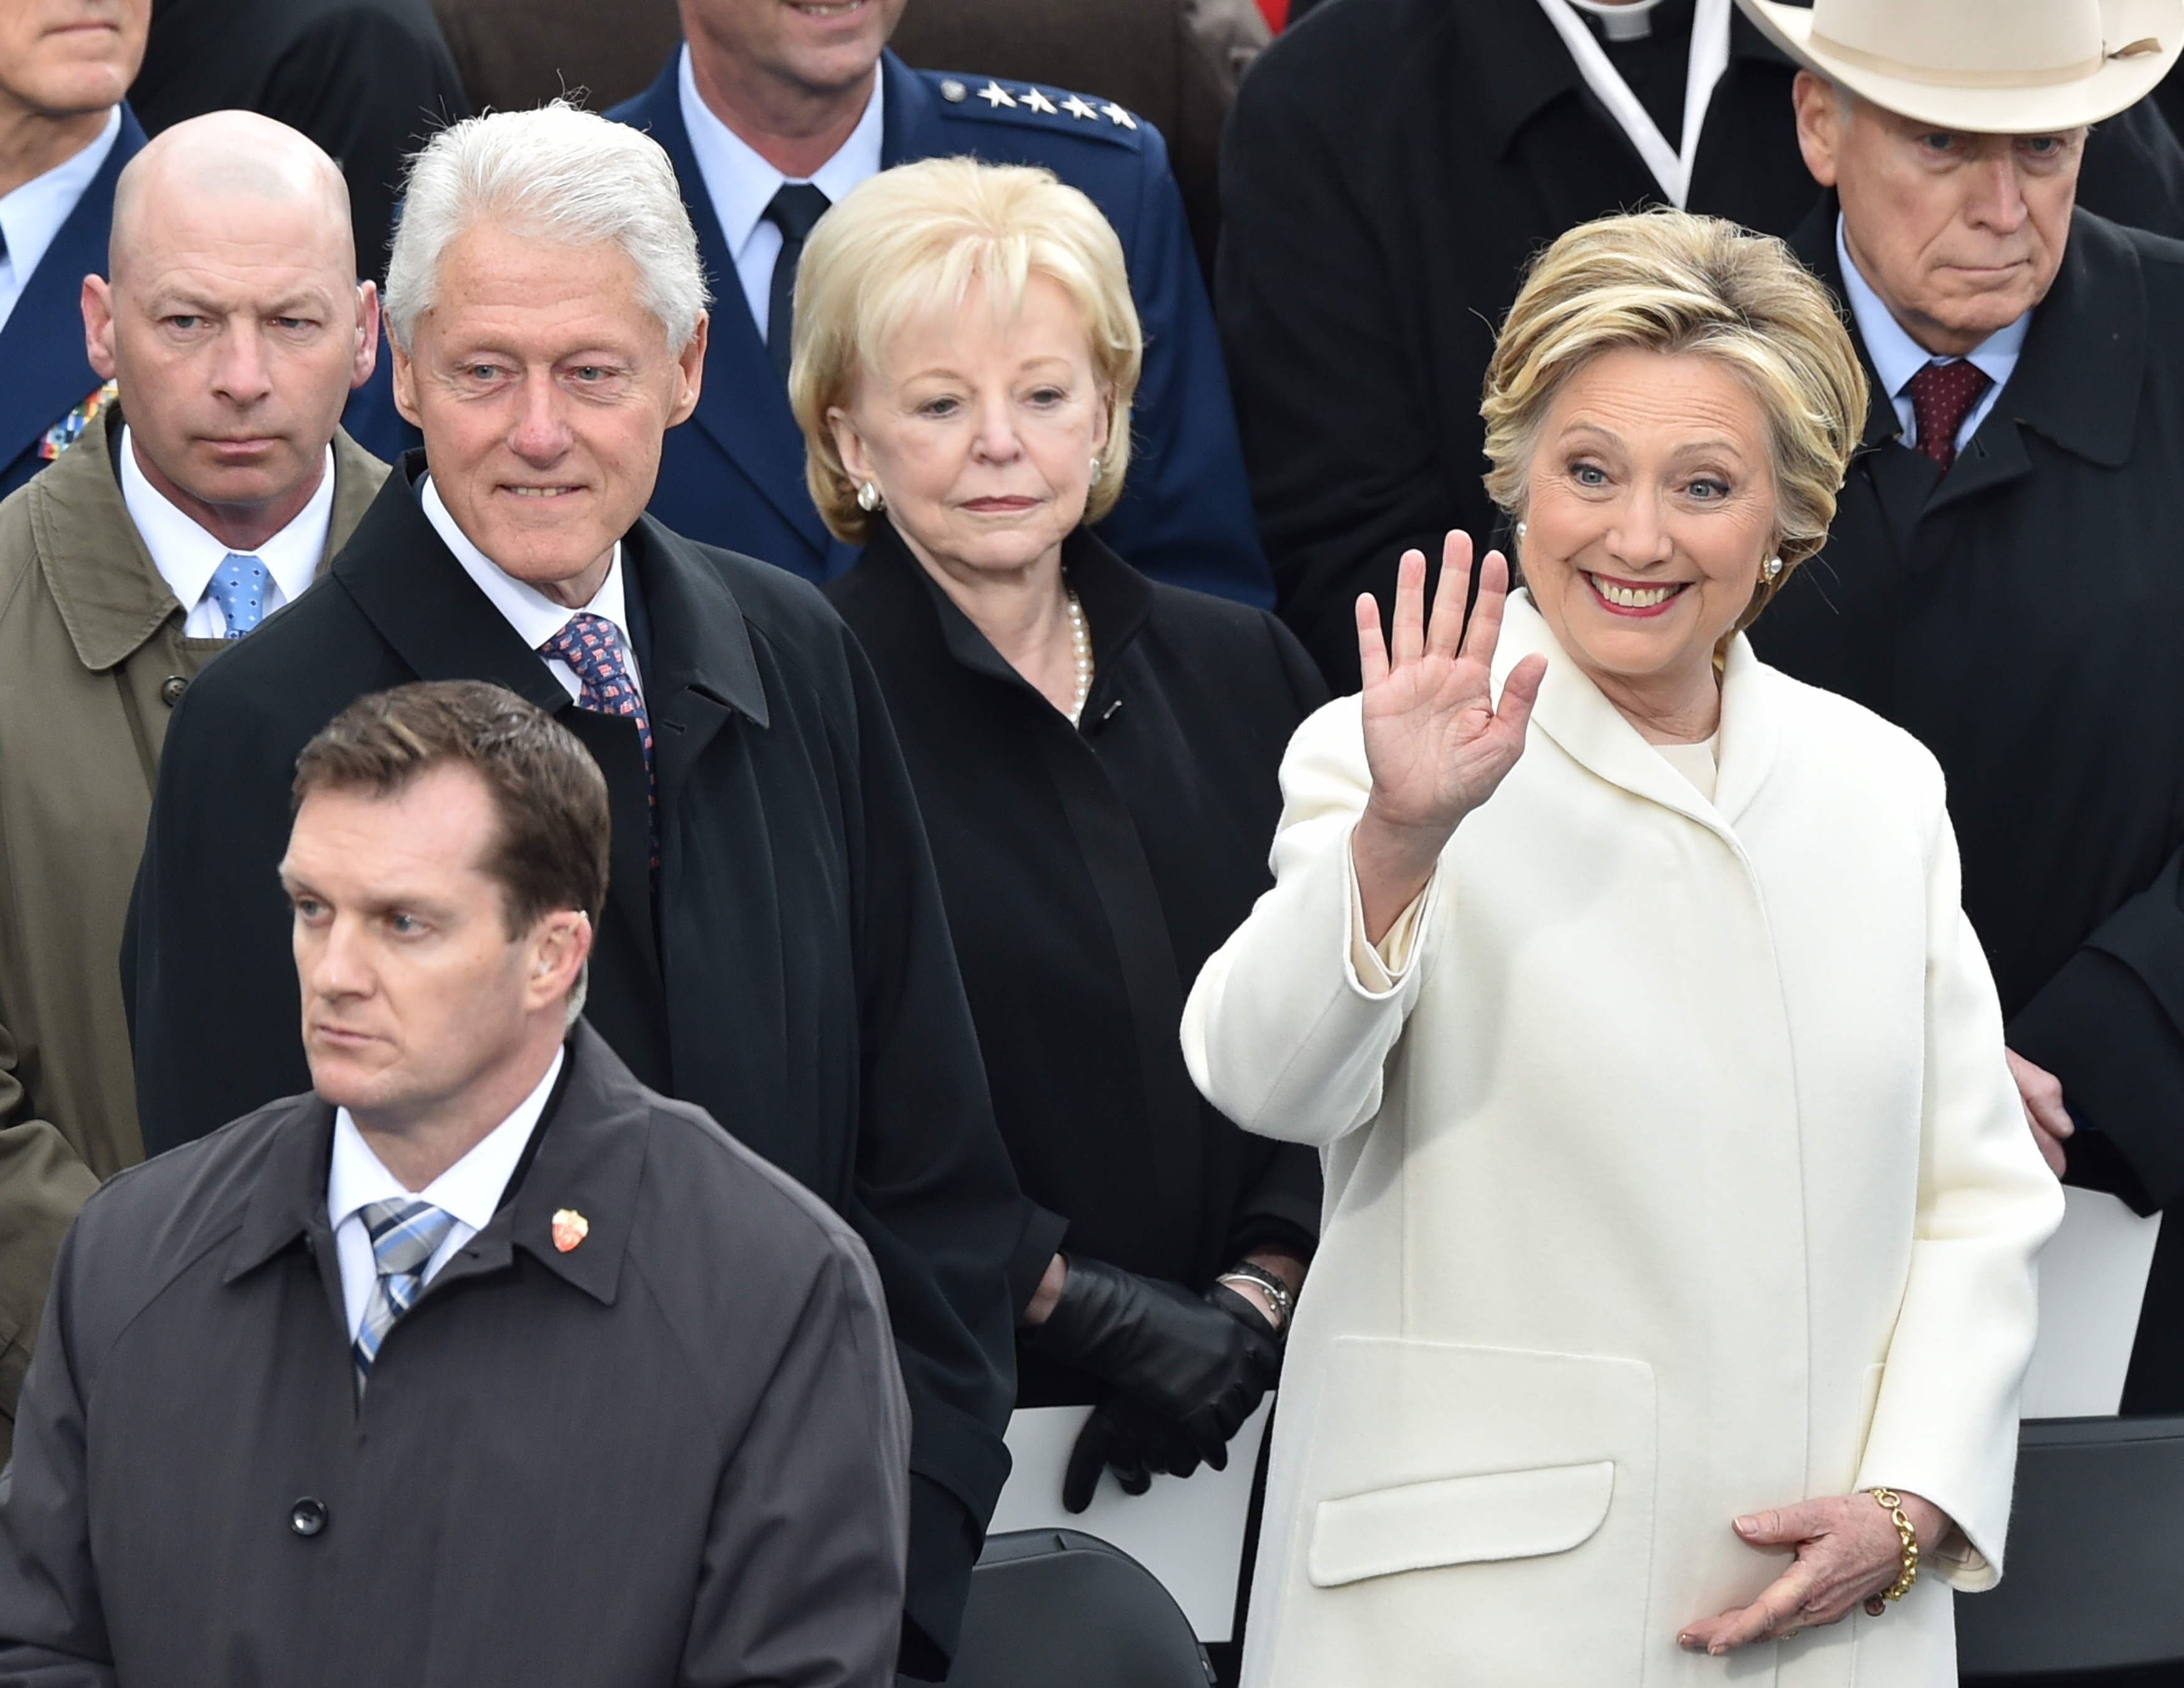 Former Us President Bill Clinton(L) and his wife Hillary Clinton(R) arrive on the platform of the US Capitol in Washington, DC, on January 20, 2017, before the swearing-in ceremony of US President-elect Donald Trump. / AFP / Paul J. Richards        (Photo credit should read PAUL J. RICHARDS/AFP/Getty Images) (PAUL J. RICHARDS—AFP/Getty Images)